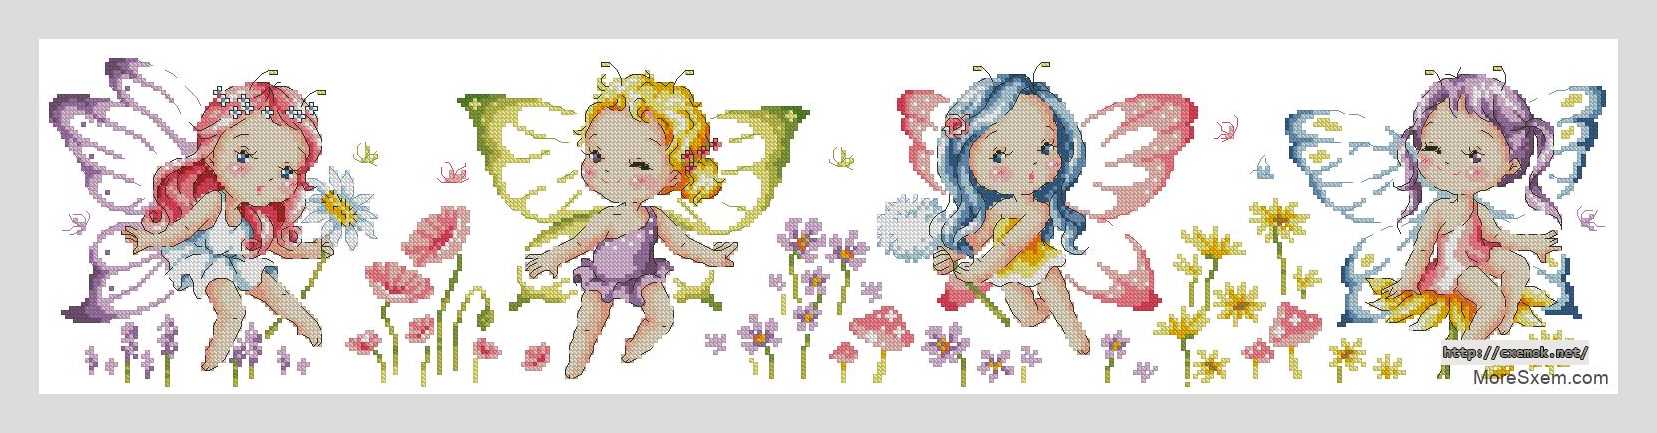 Download embroidery patterns by cross-stitch  - Девочки-бабочки